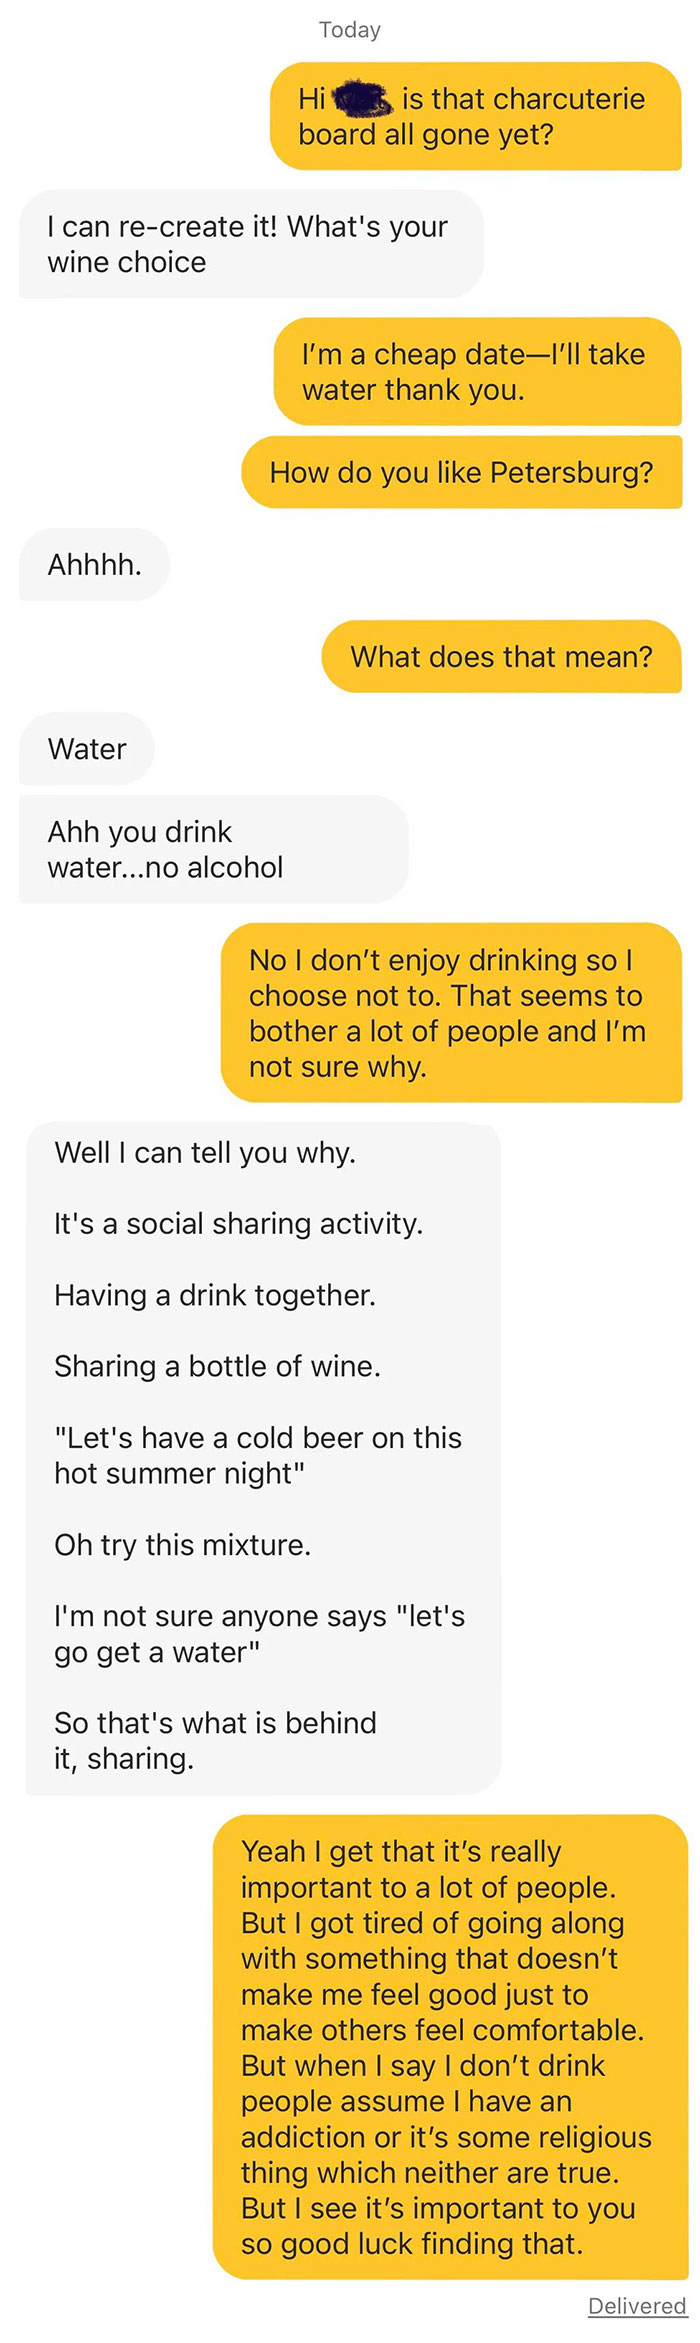 Drinking Is Really Important To Some People